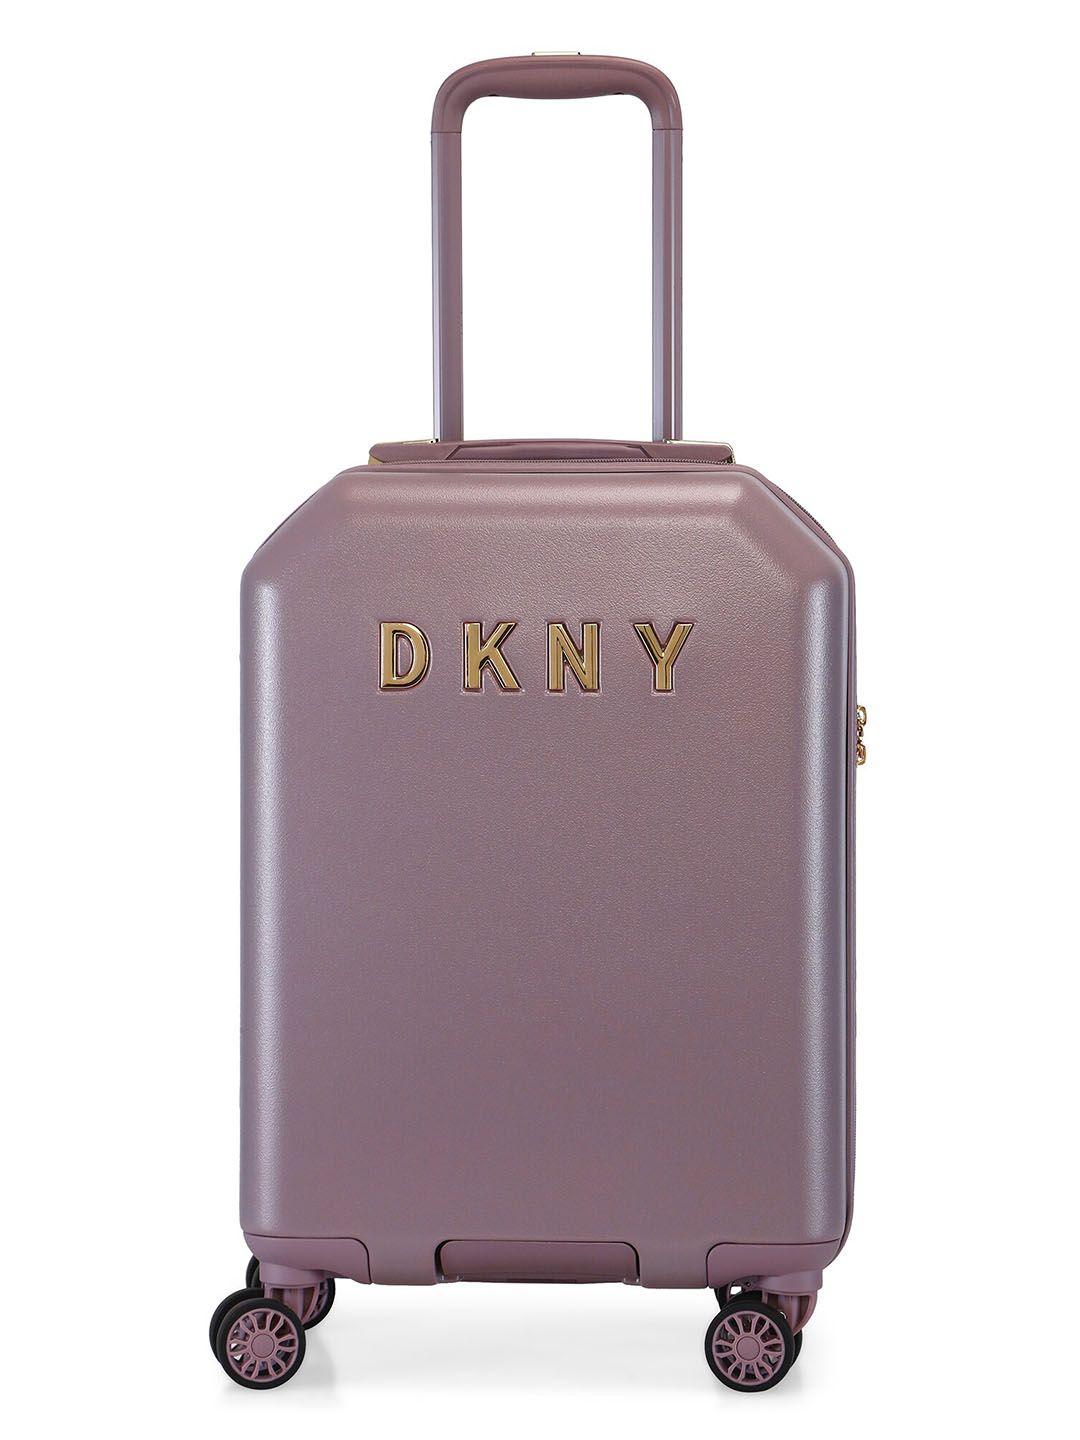 dkny allure pink hard-sided cabin trolley suitcase